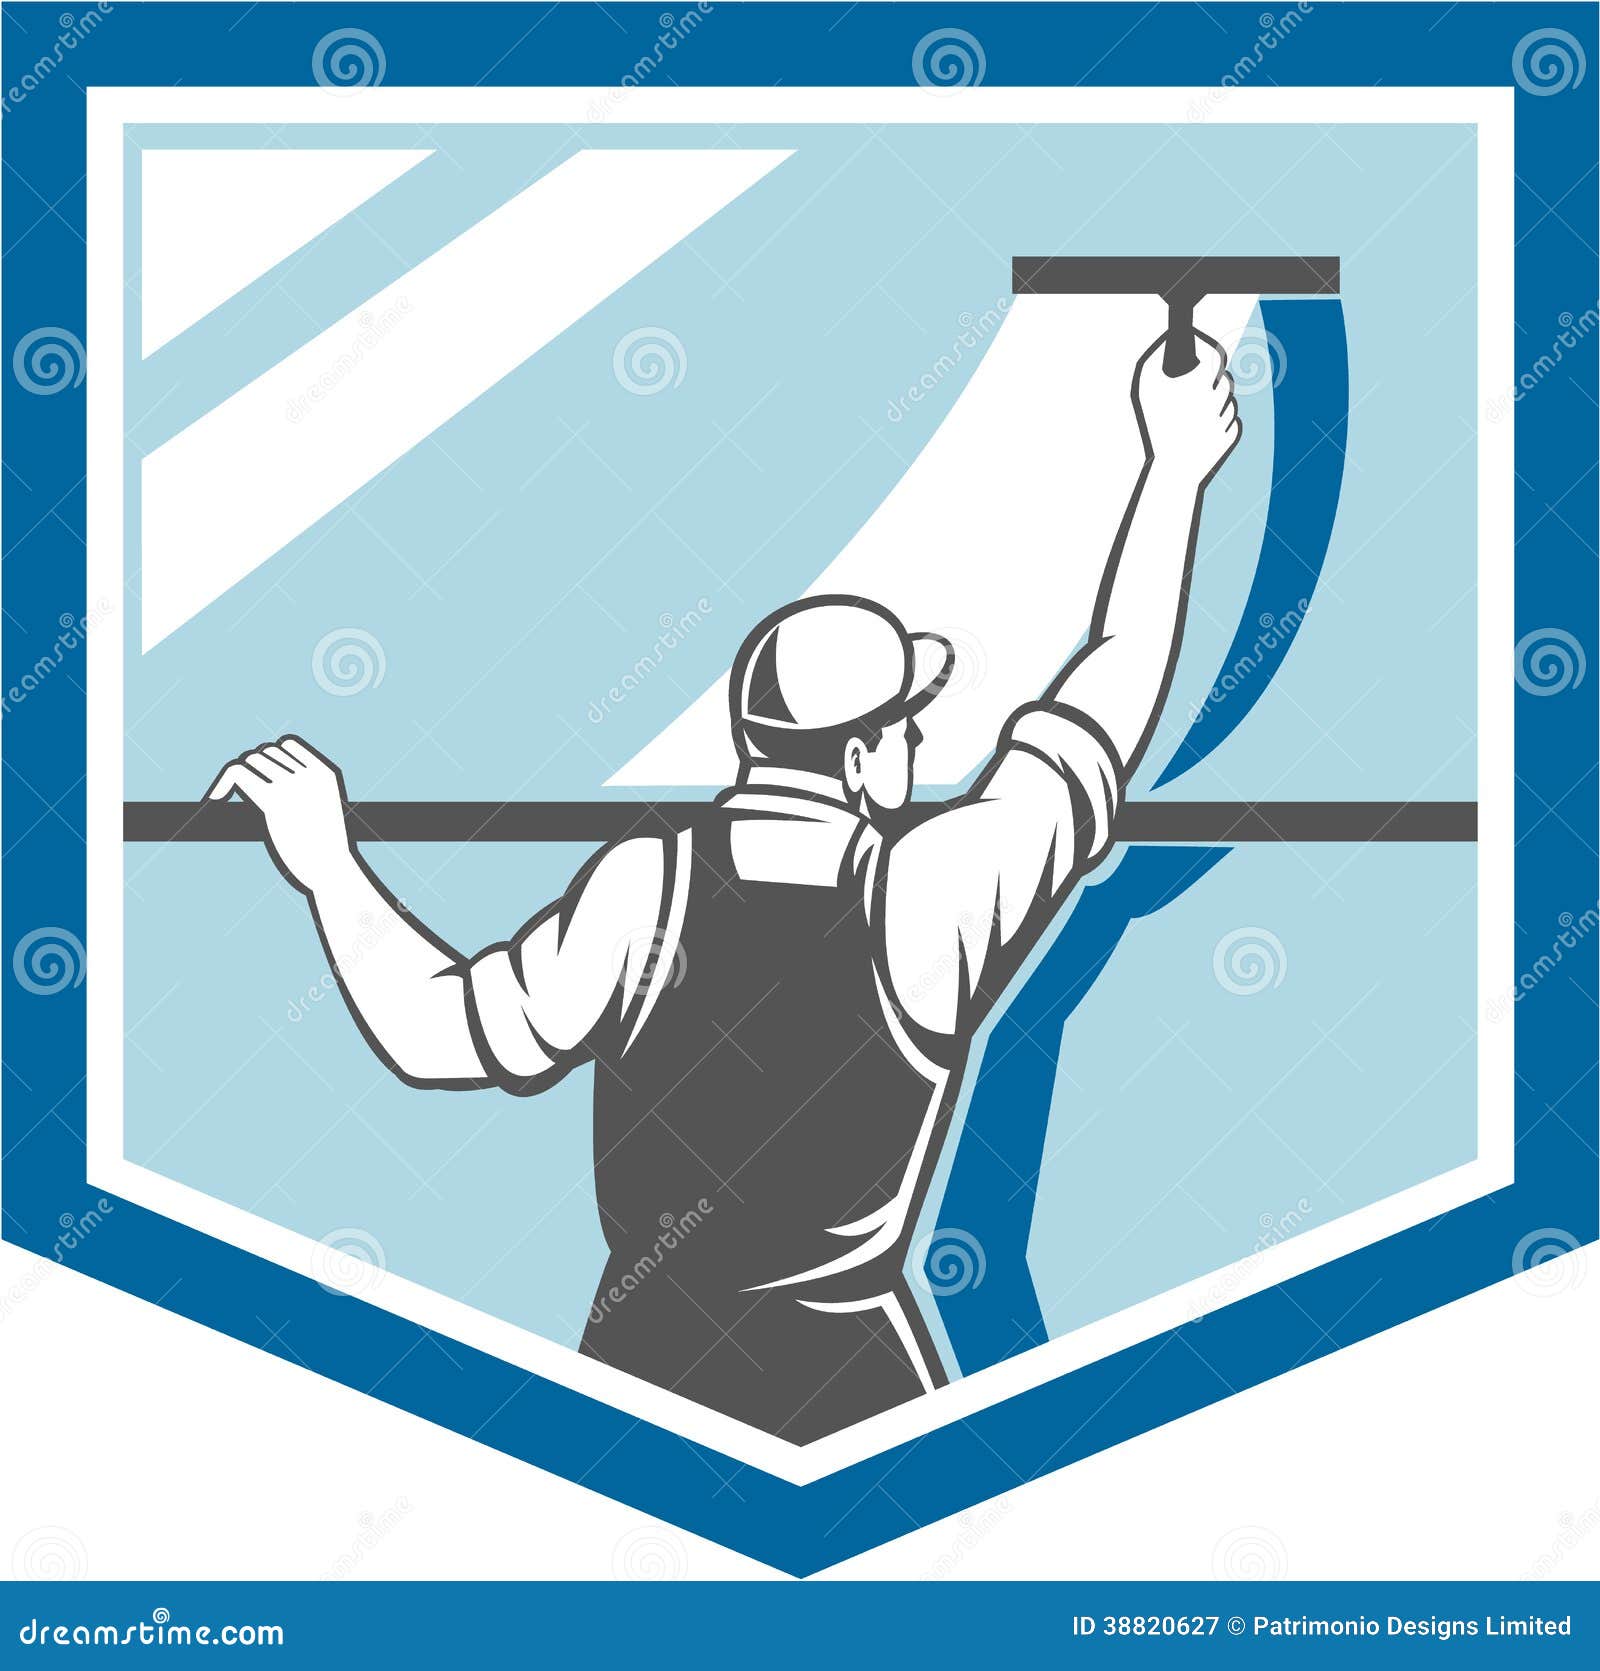 clipart window cleaner - photo #19